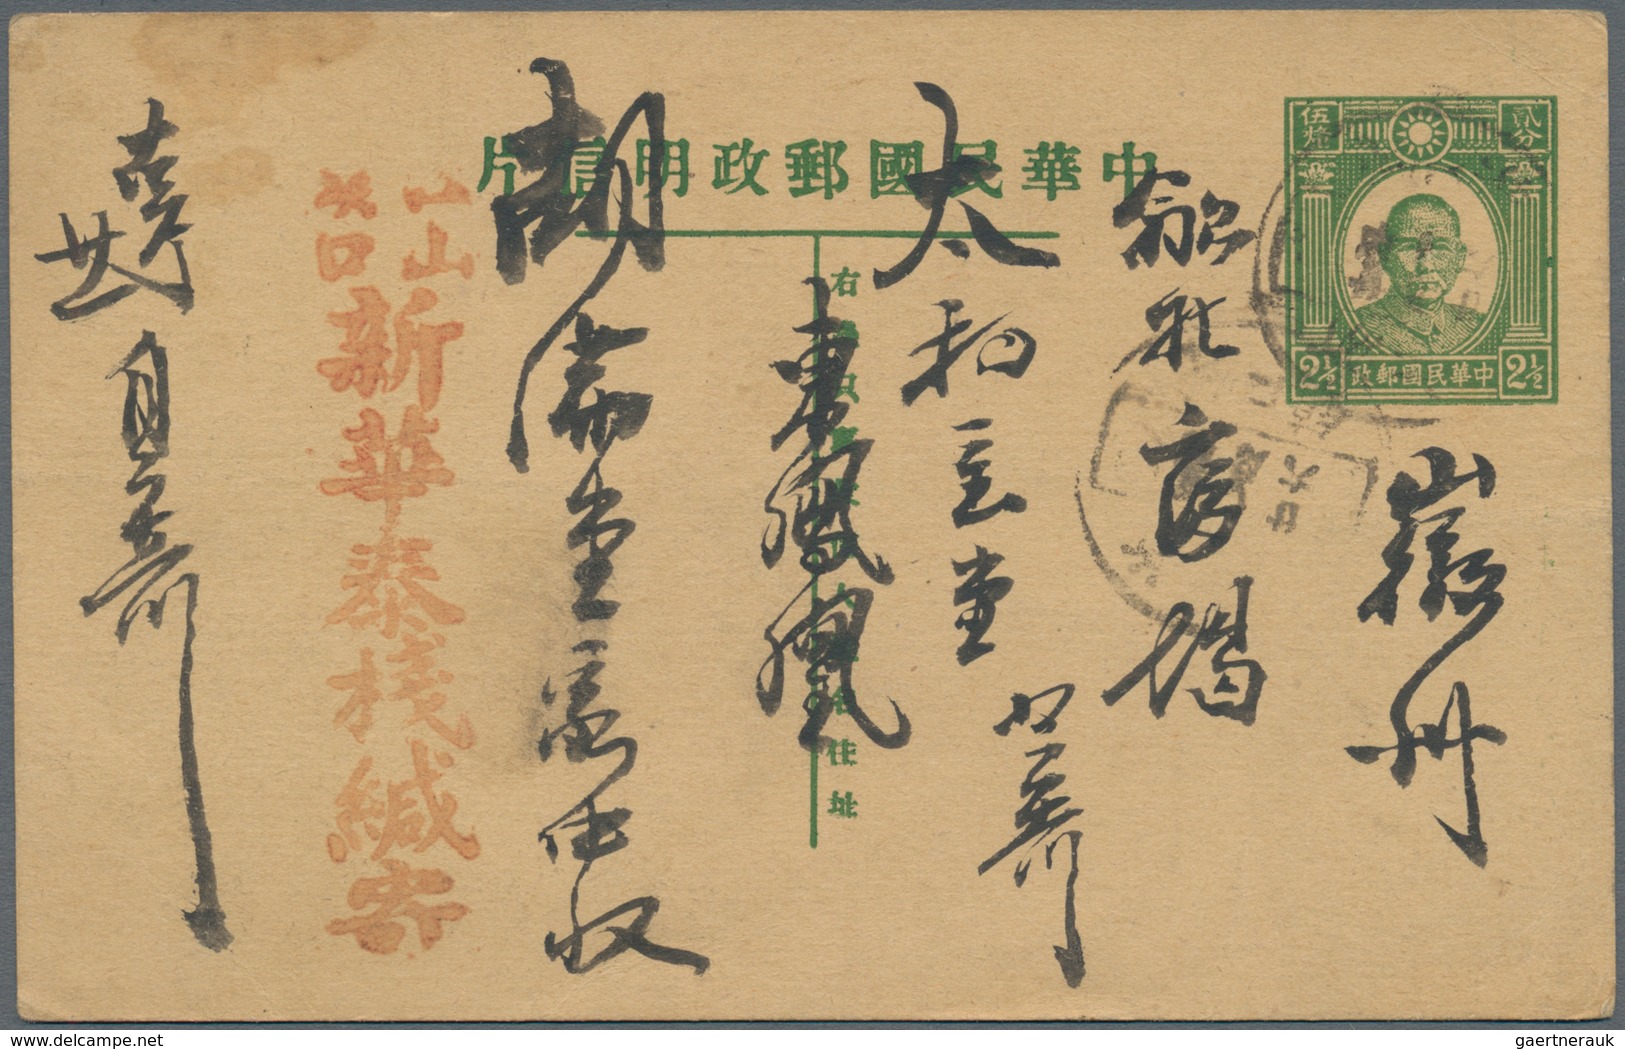 China - Ganzsachen: 1915/36, used stationery cards junk (6 inc. two uprated) or SYS (3, one mint), t